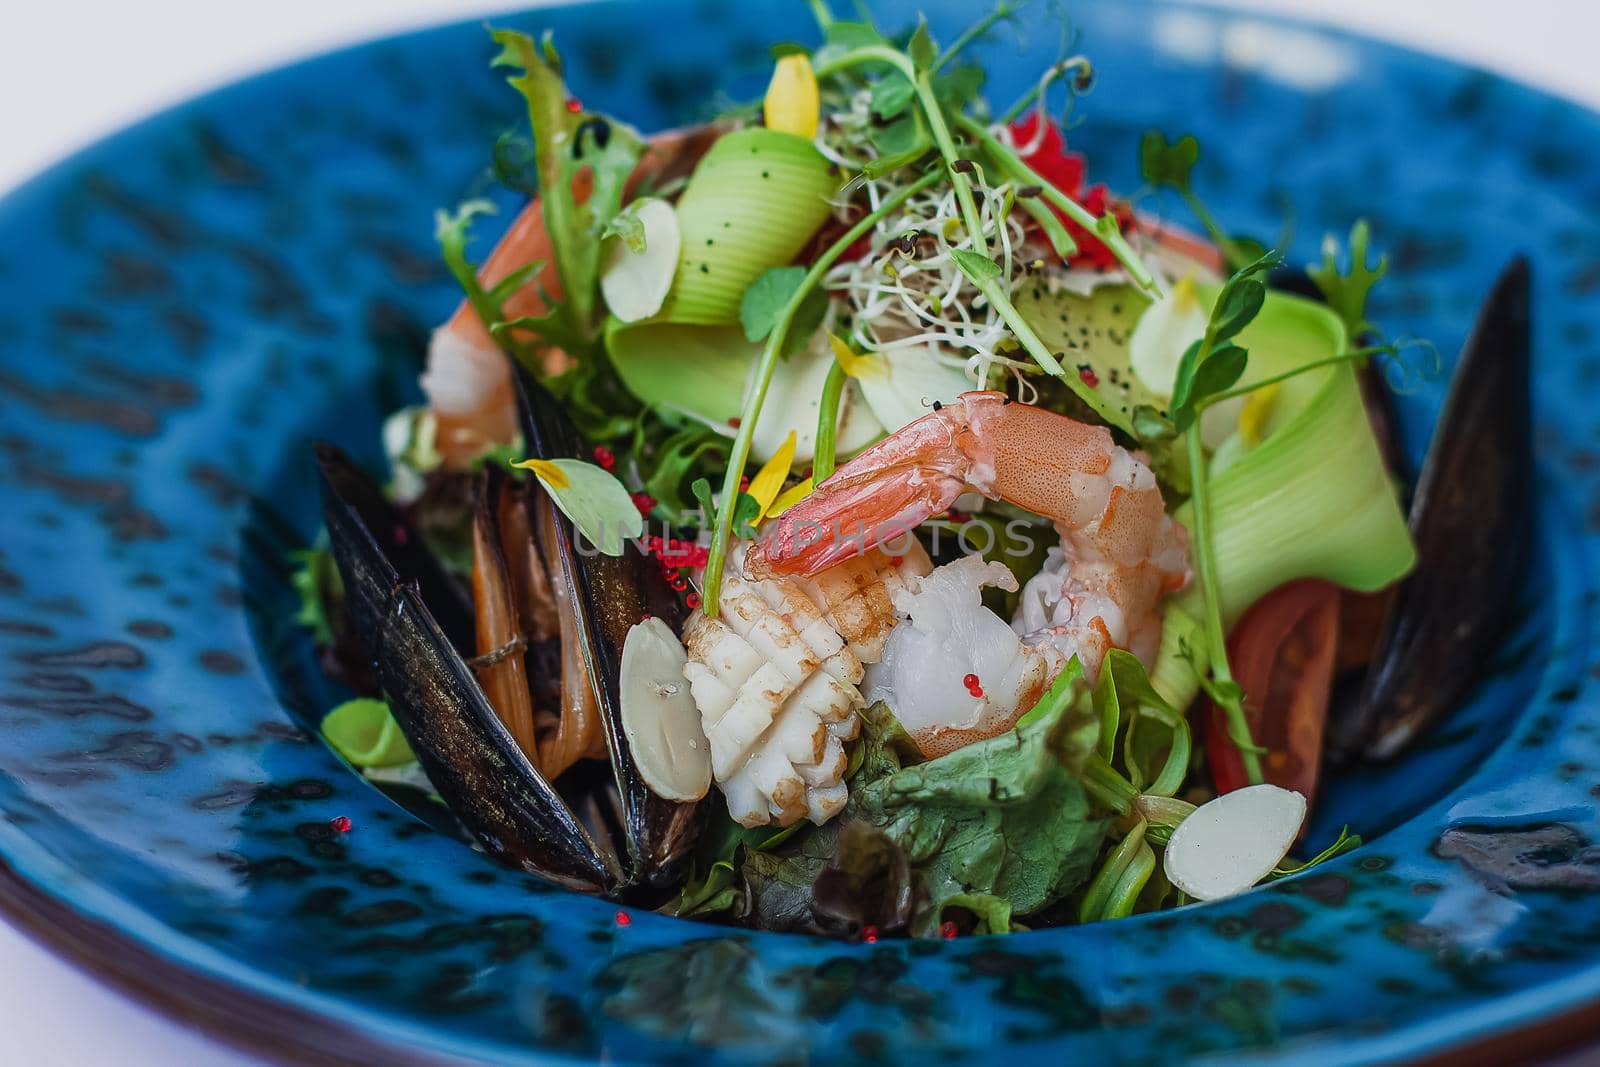 Seafood salad, with mixed greens, avocado, shrimps, mussels. Delicious healthy eating.